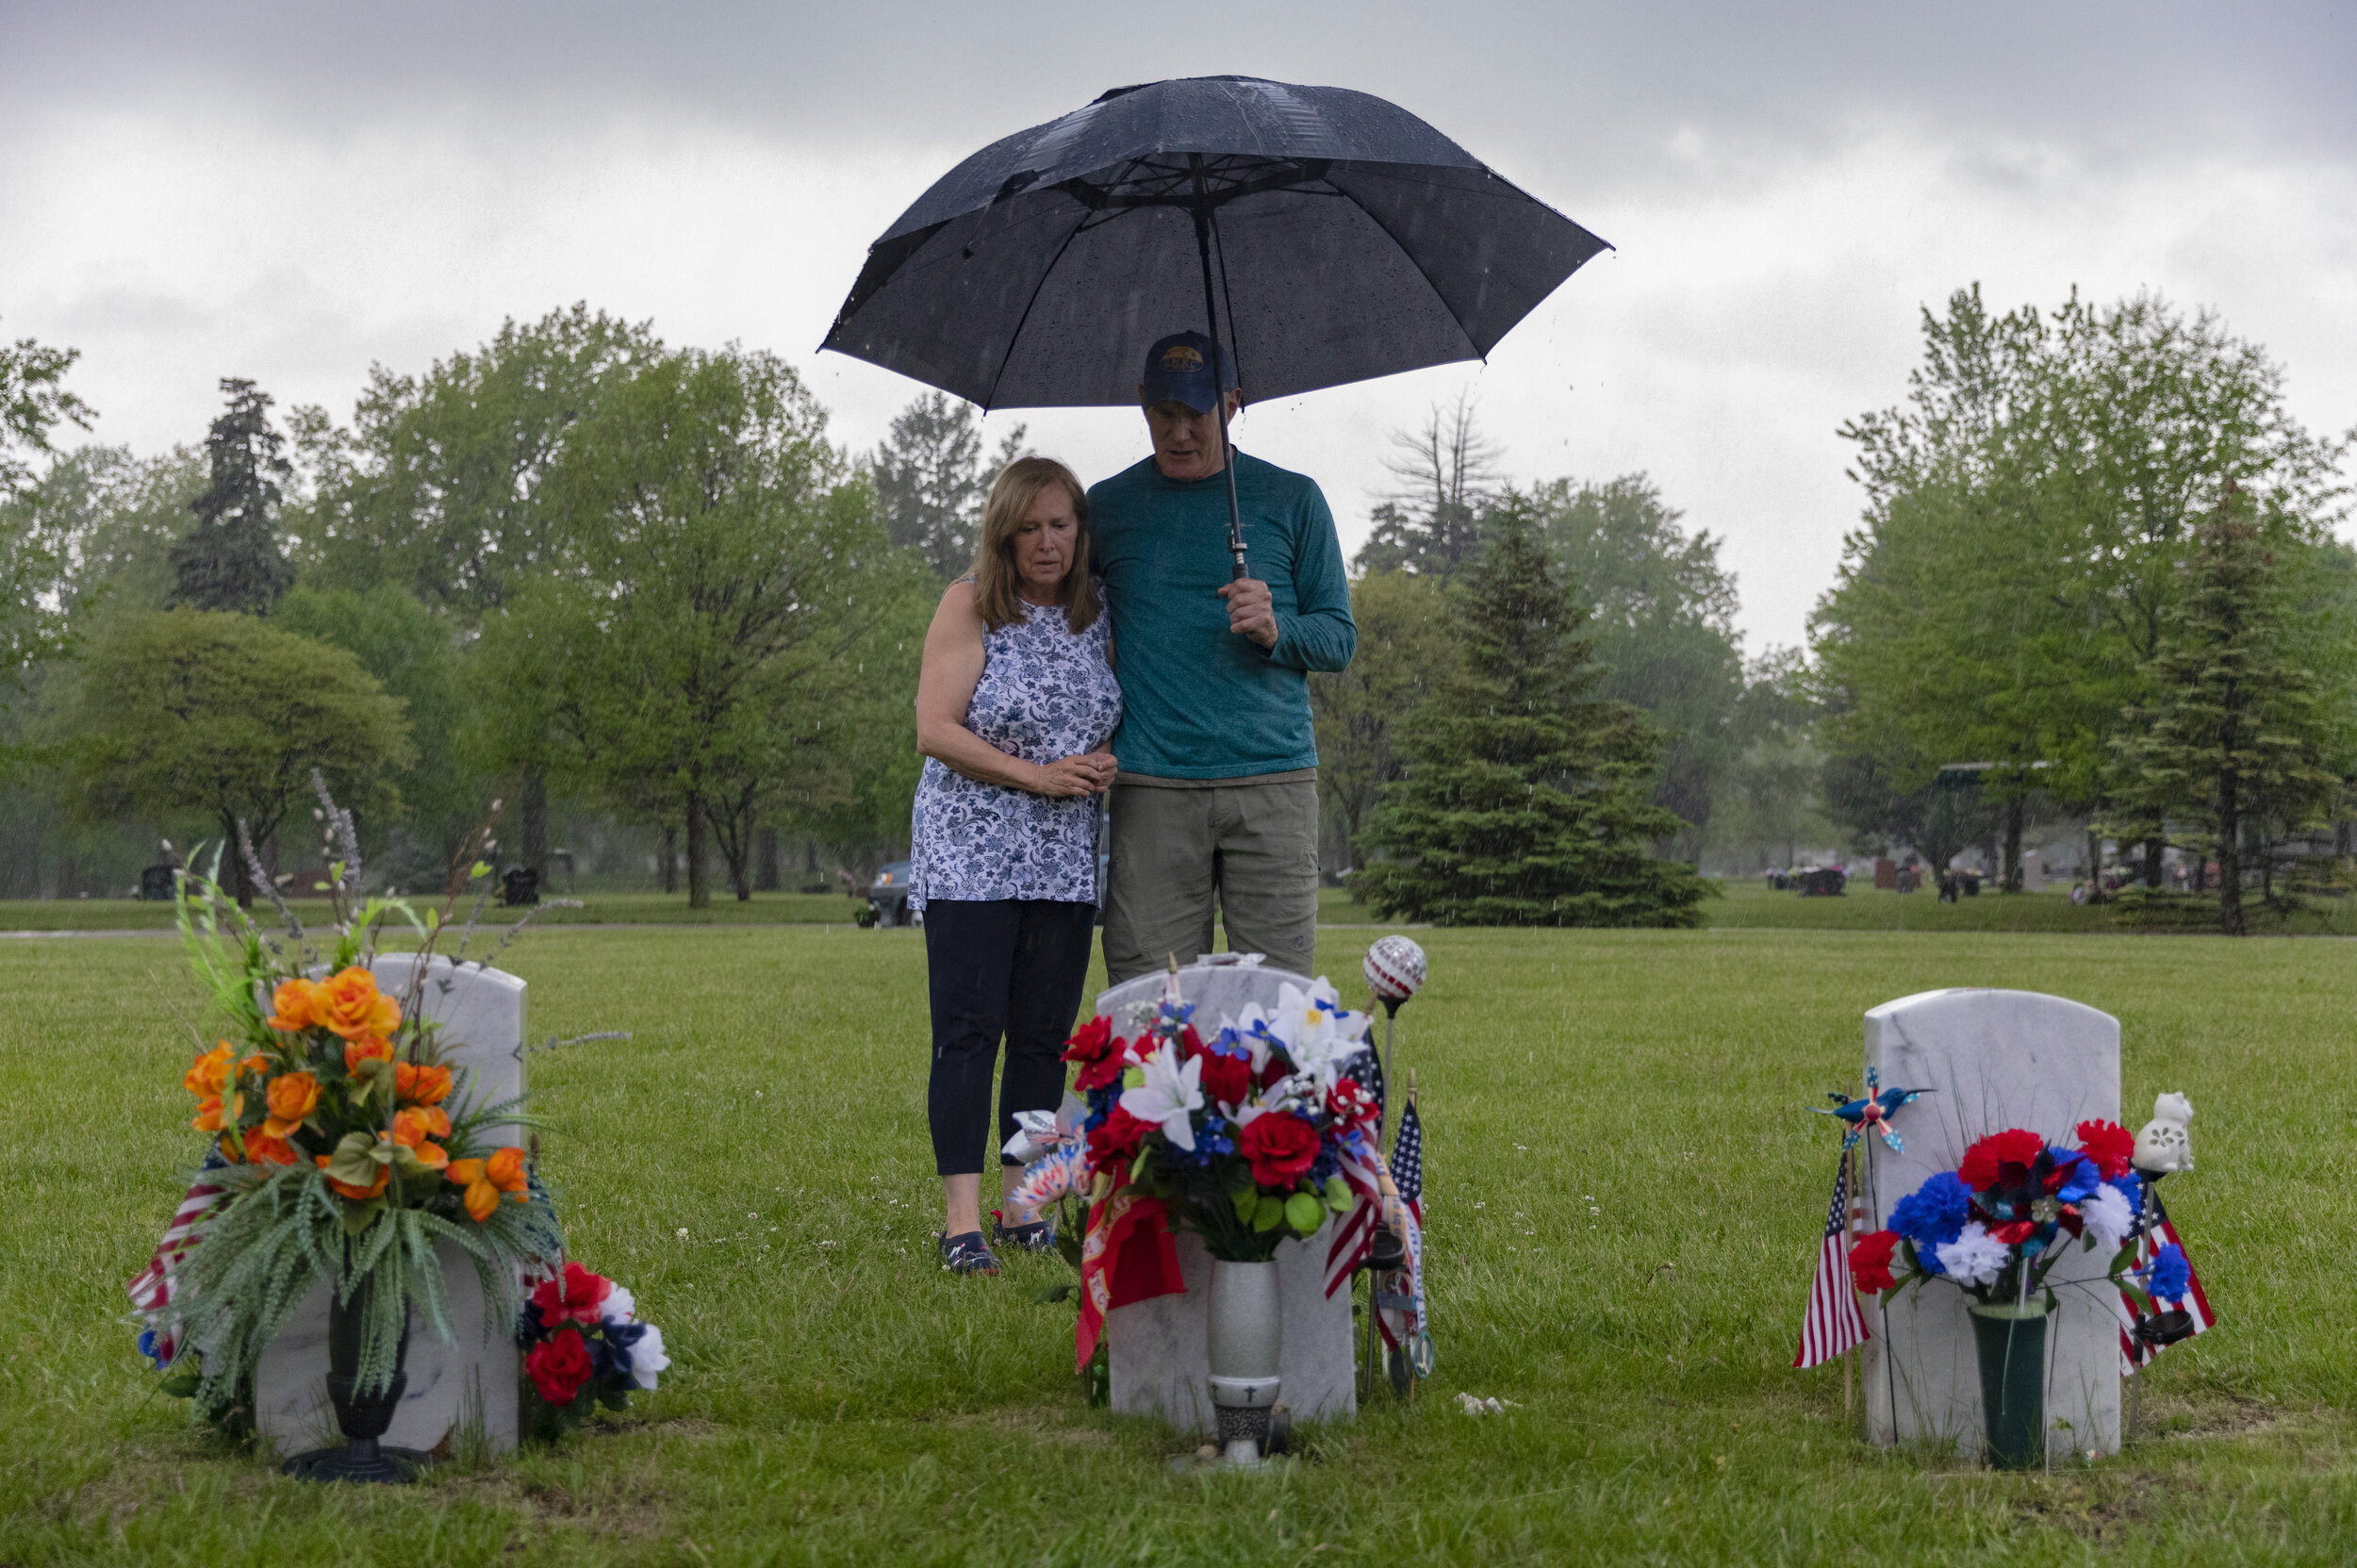  Susan (left) and Bryan Phillips visit the grave of their son Michael Phillips during a heavy downpour before Memorial day on Friday, May 22, 2020, at Wyuka Cemetery. Michael served in the Marine Corps in Morocco, Uganda, and two tours of duty in Ira